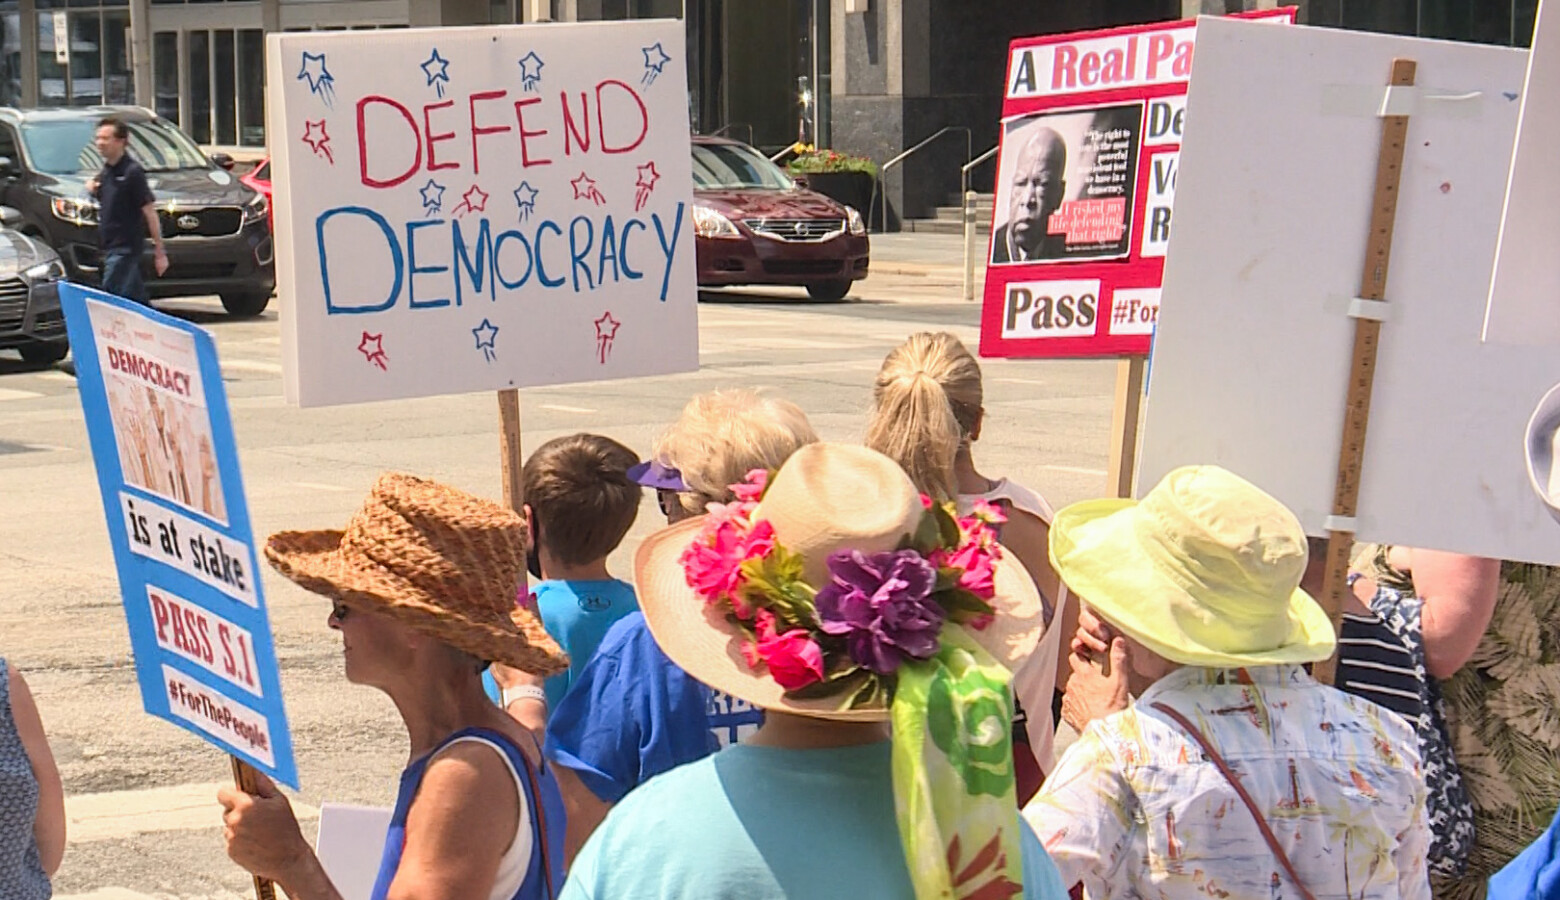 Demonstrators gathered in front of U.S. Sen. Todd Young (R-Ind.)'s office before marching to the office of U.S. Sen. Mike Braun (R-Ind.) a few blocks away. (Lauren Chapman/IPB News)